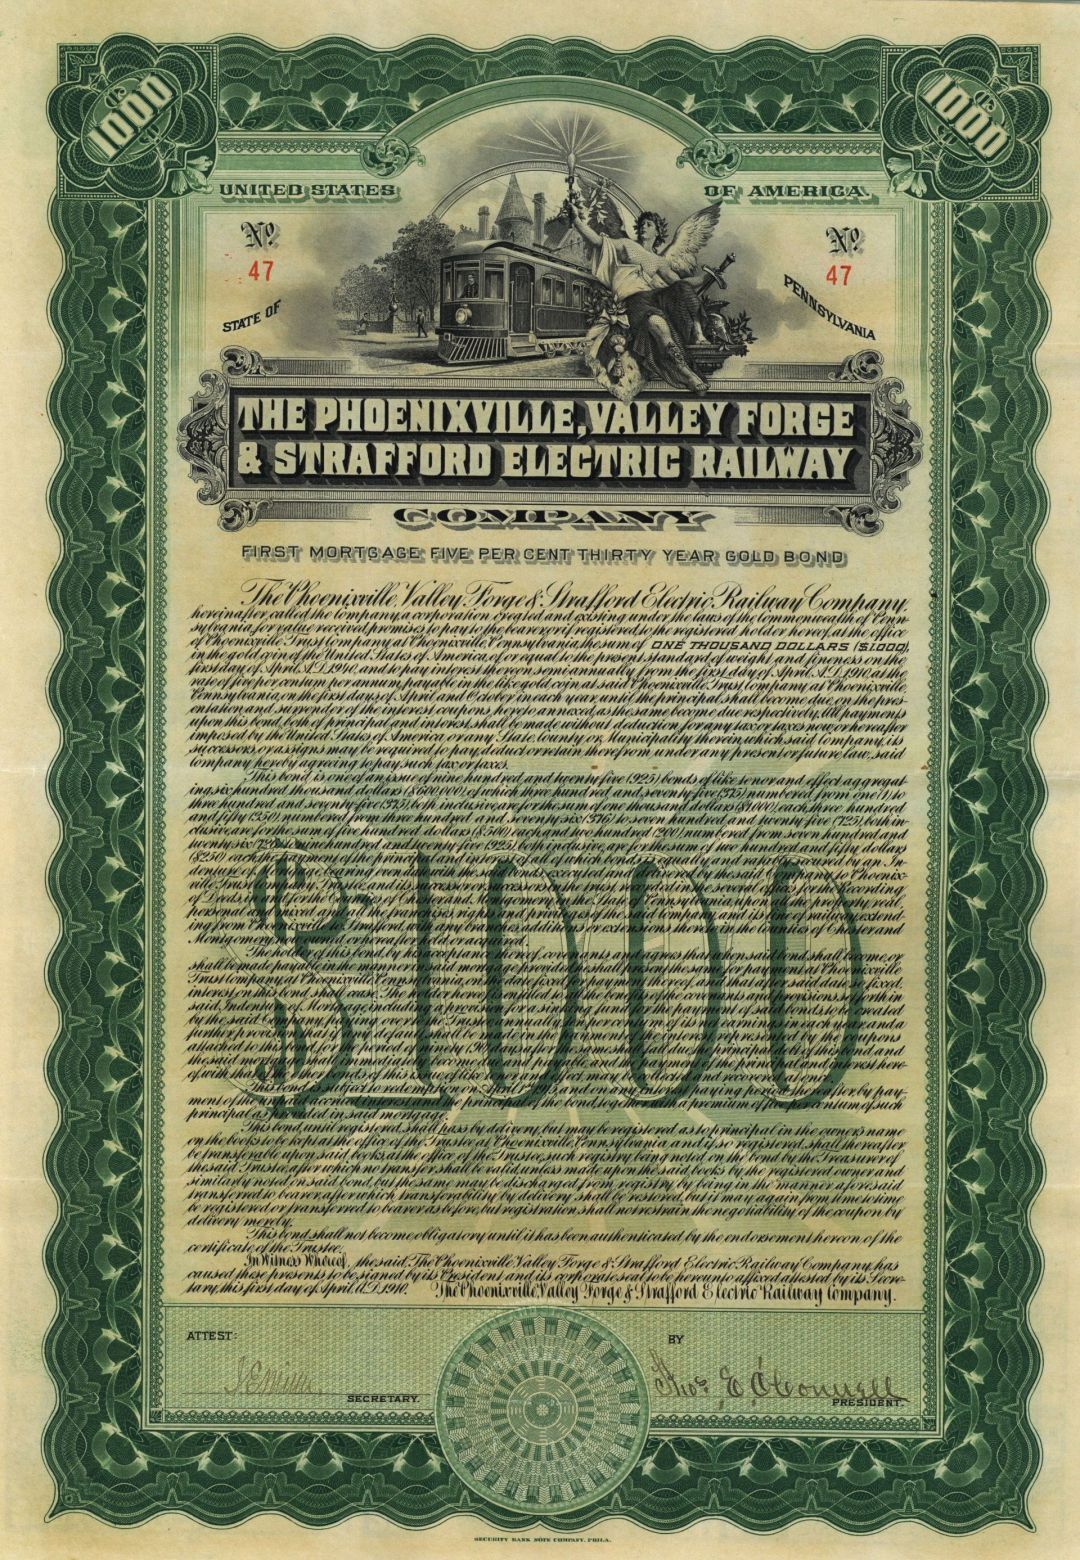 Phoenixville, Valley Forge and Strafford Electric Railway - $1,000 Green Uncance